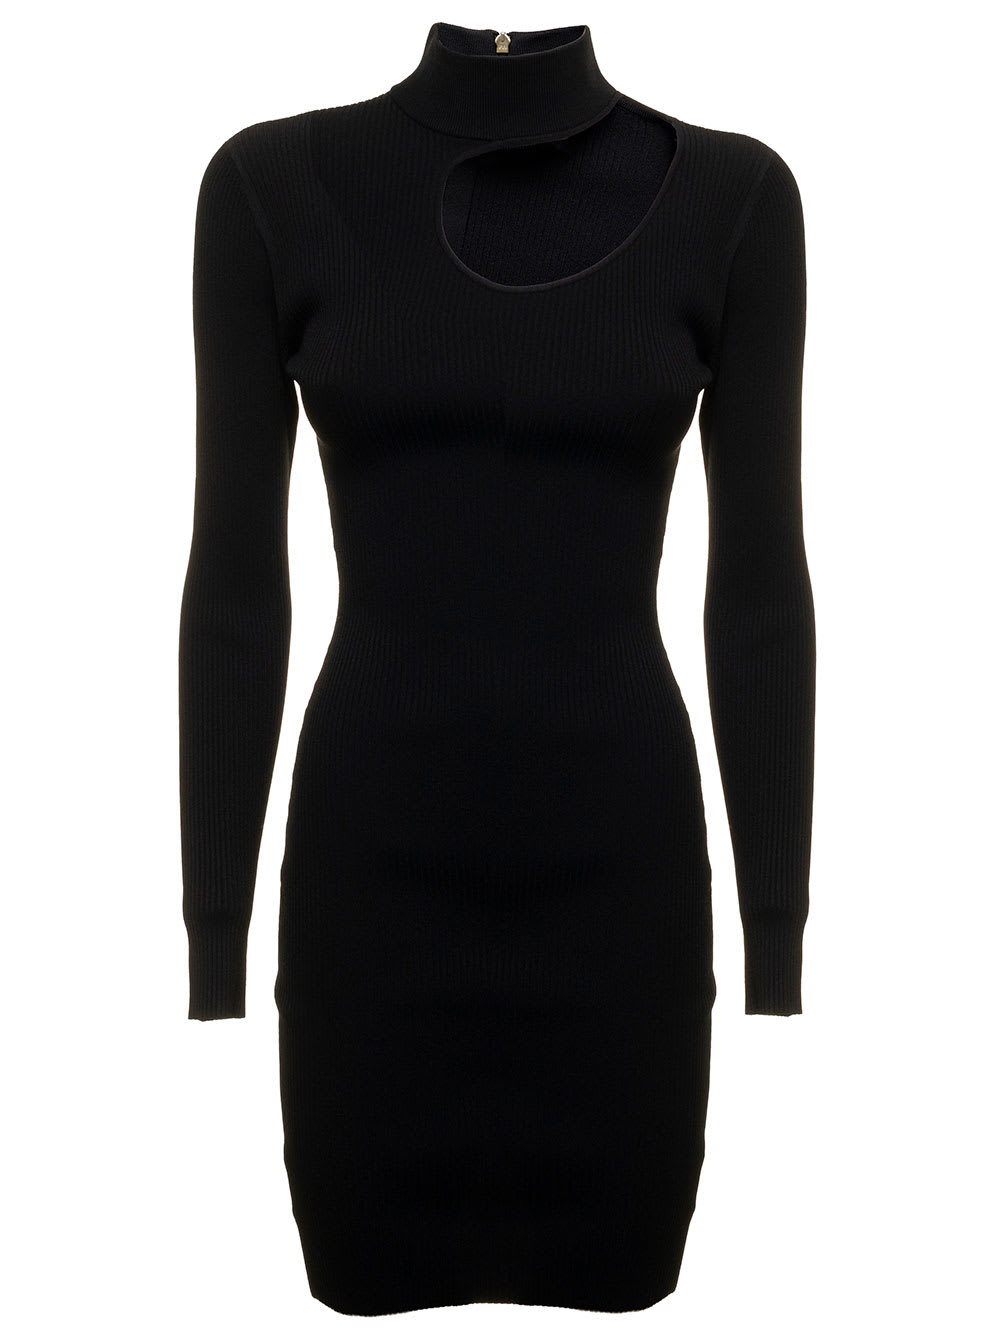 MICHAEL Michael Kors Black Recycled Viscose Dress With Cut Out Detail M Michael Kors Woman